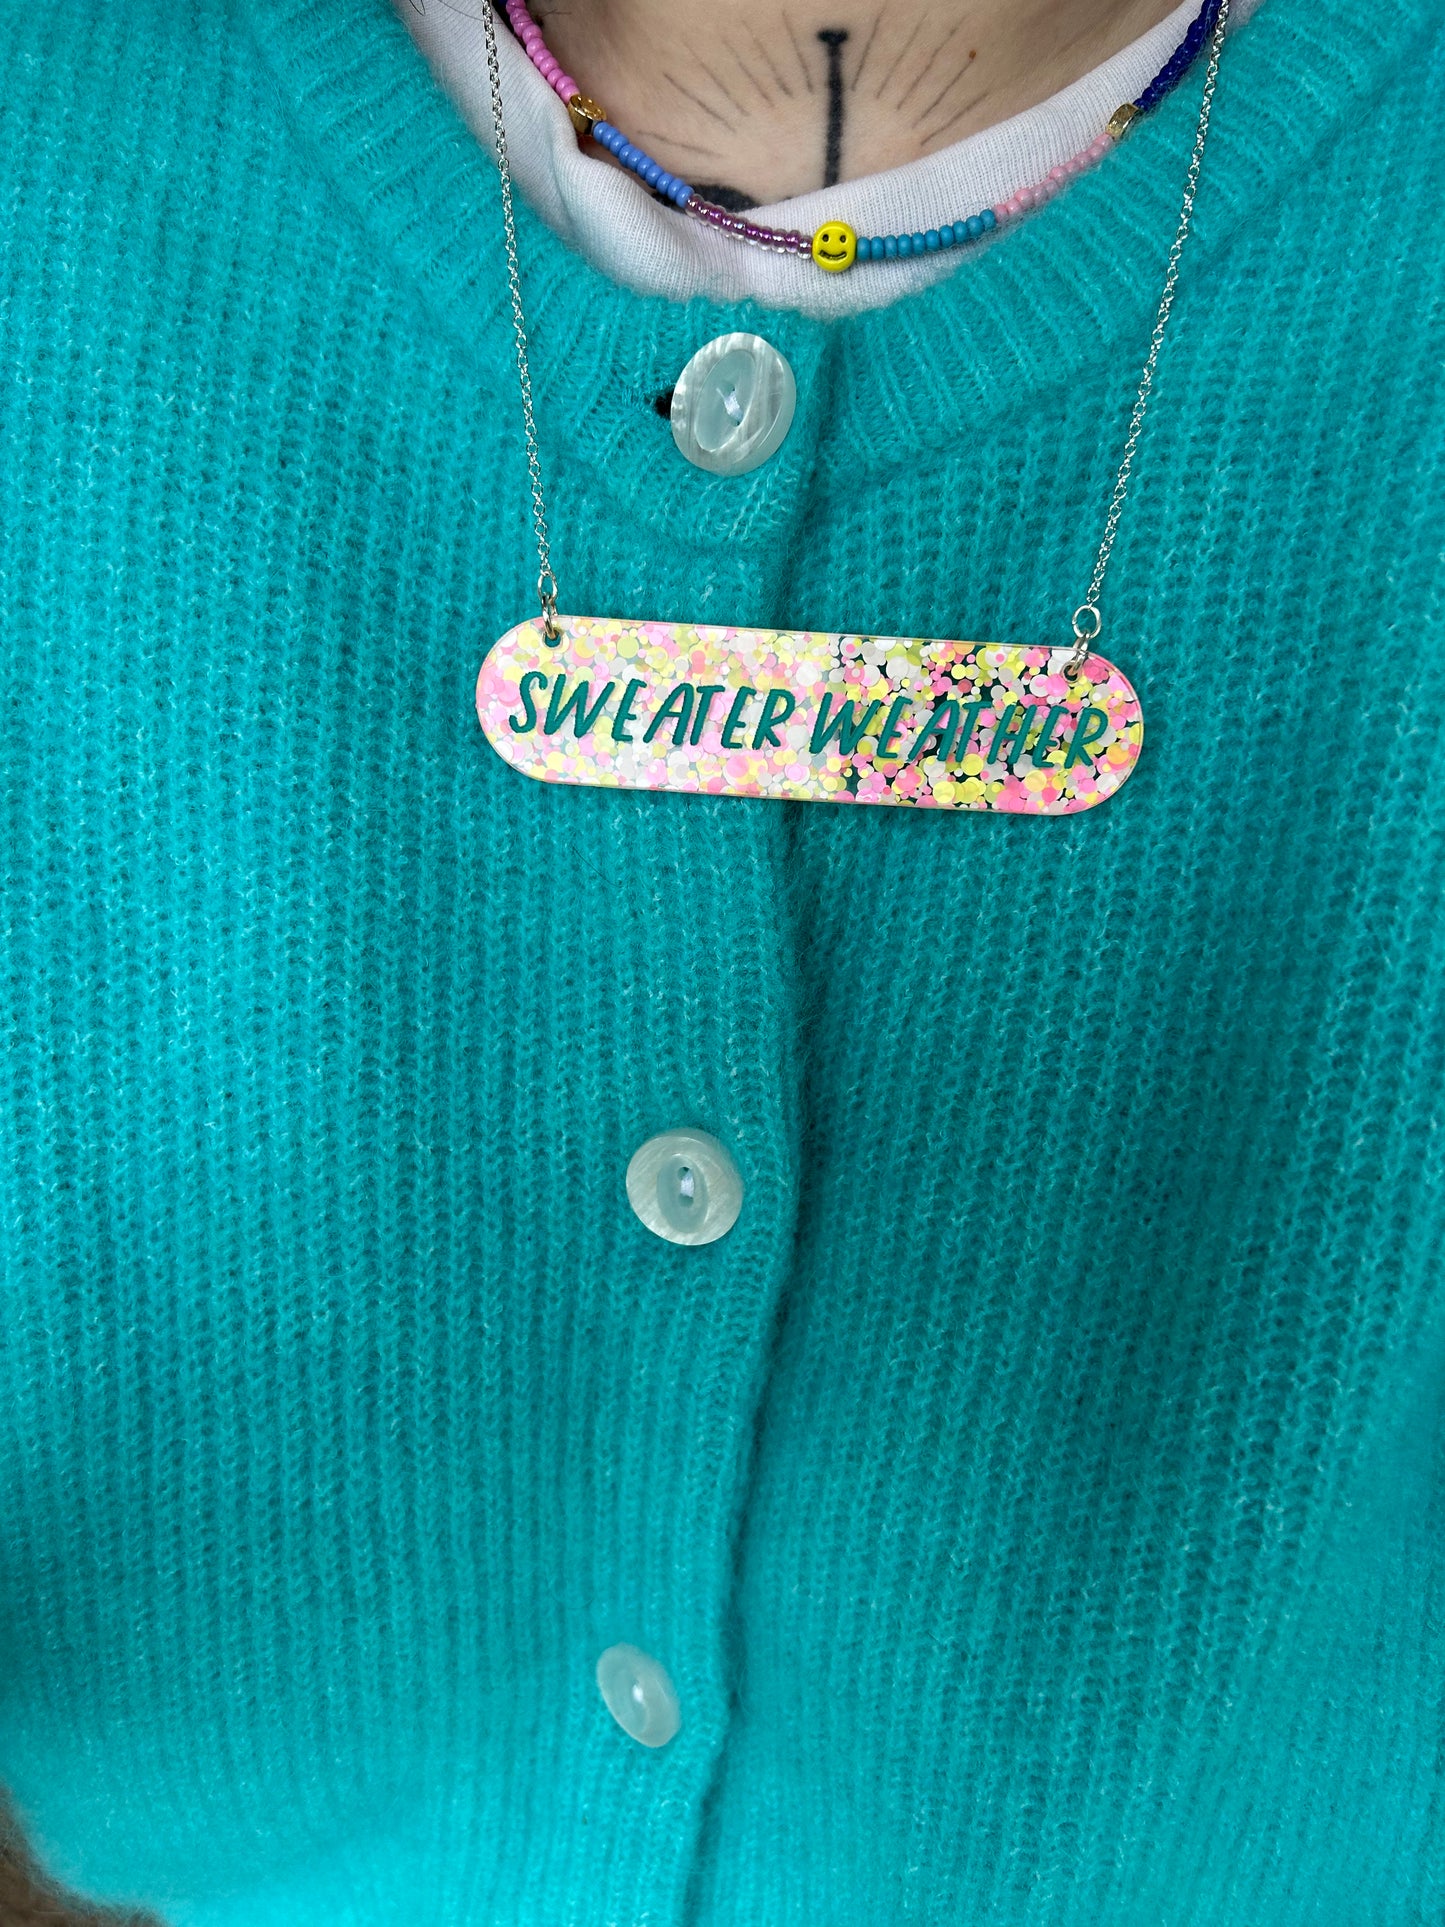 Sweater Weather Acrylic Necklace